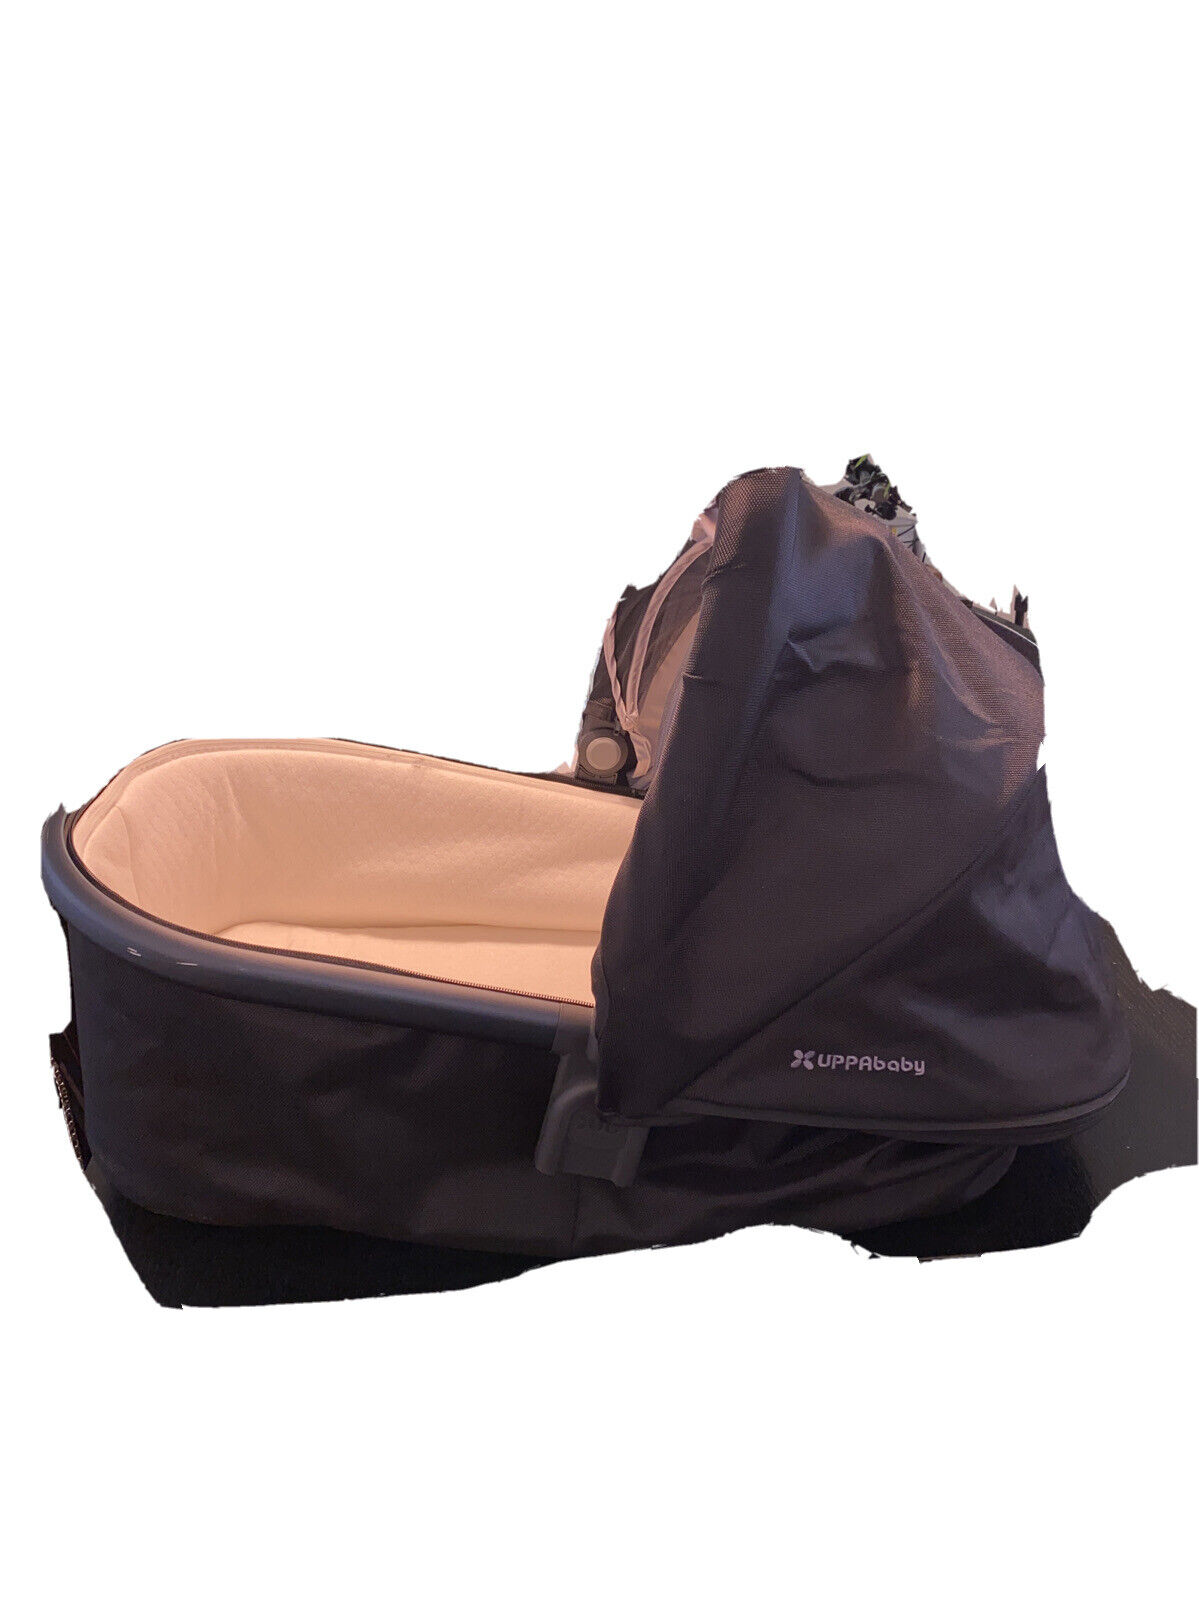 Uppababy Vista Bassinet Slightly Used - Receive Exact Item Pictures, W/ Sunshade